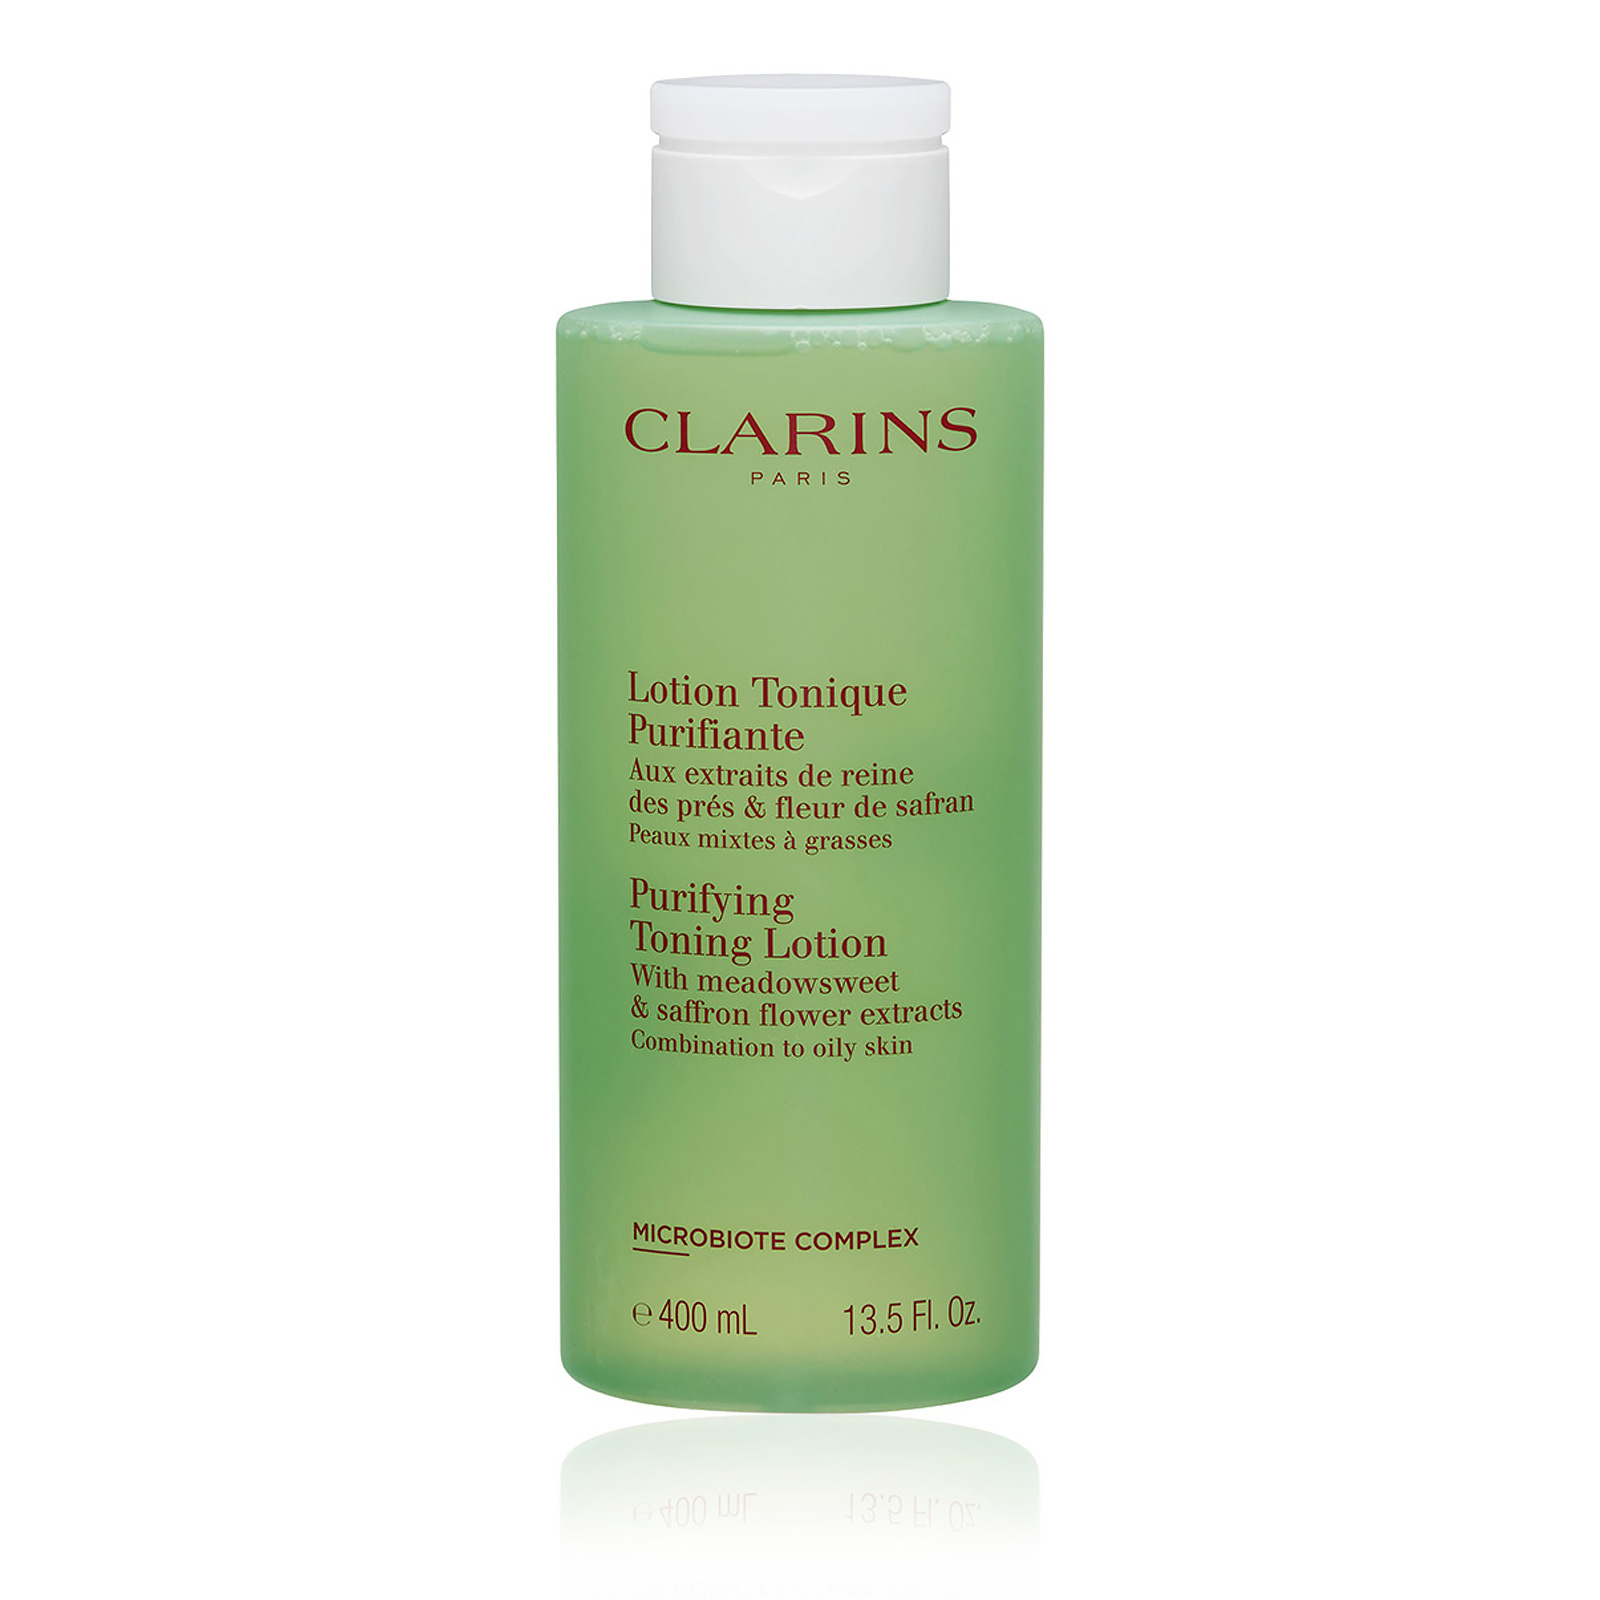 Intervenere Frosset Neuropati Clarins Purifying Toning Lotion (Combination To Oily Skin)400 ml 13.5 oz  AKB Beauty